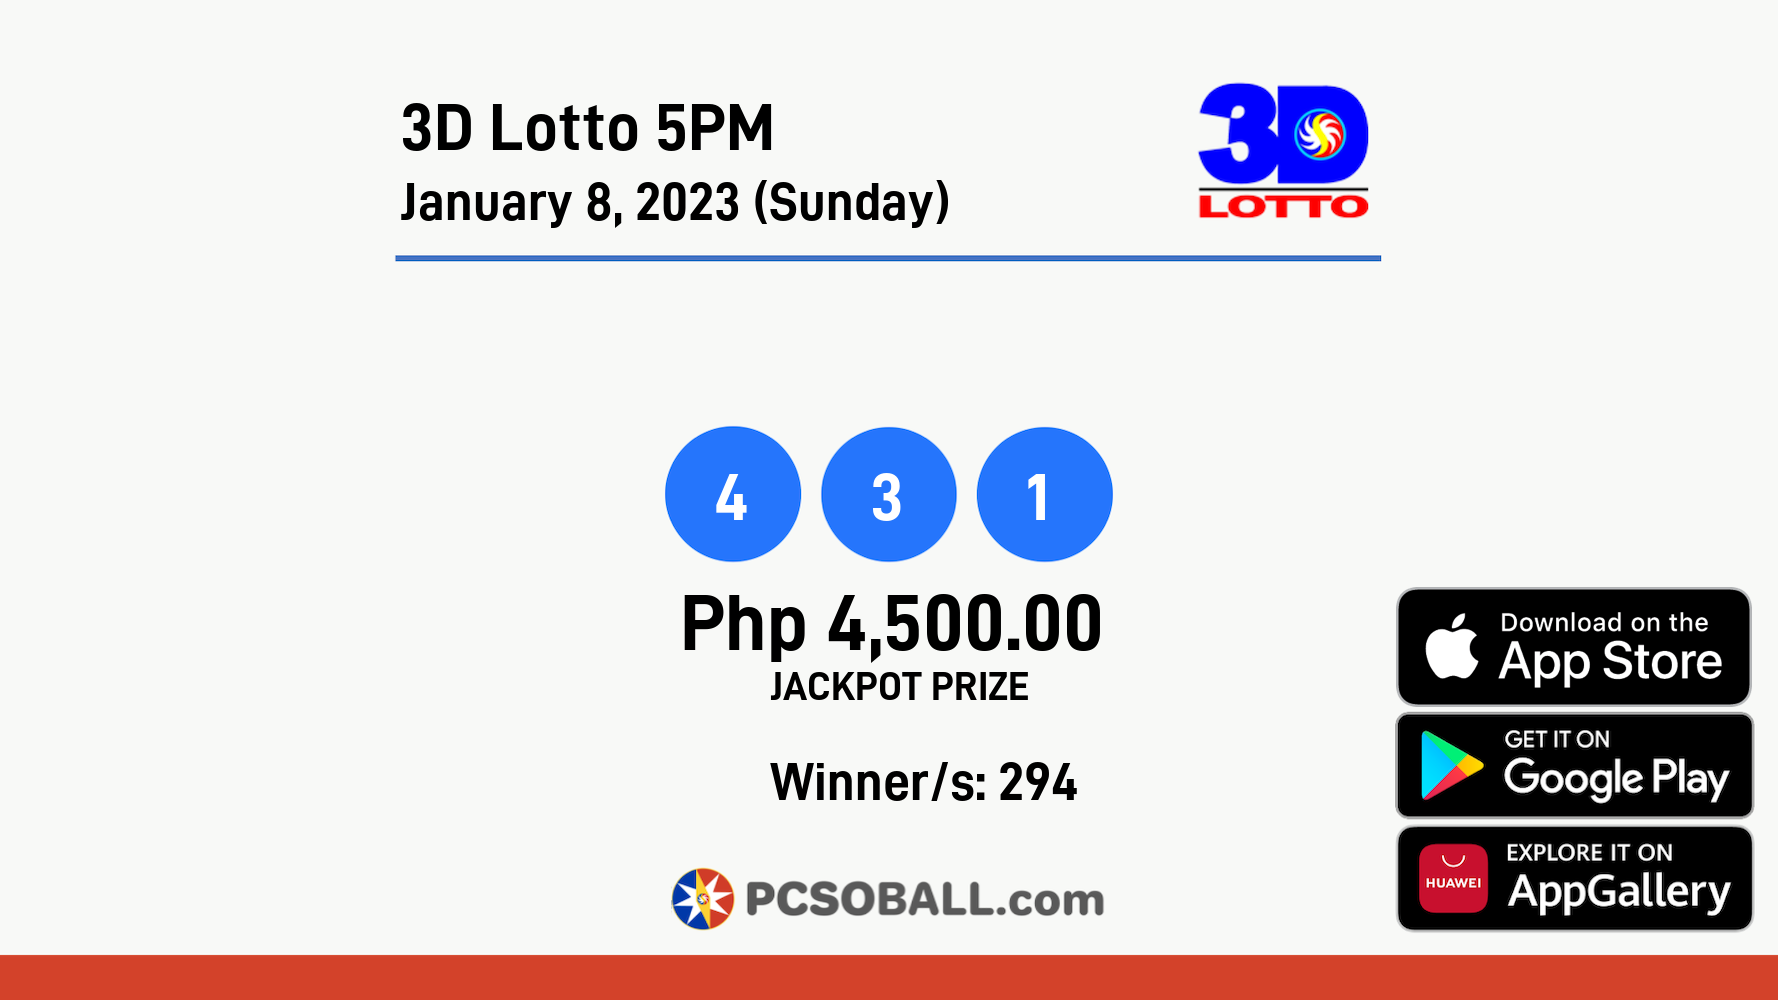 3D Lotto 5PM January 8, 2023 (Sunday) Result